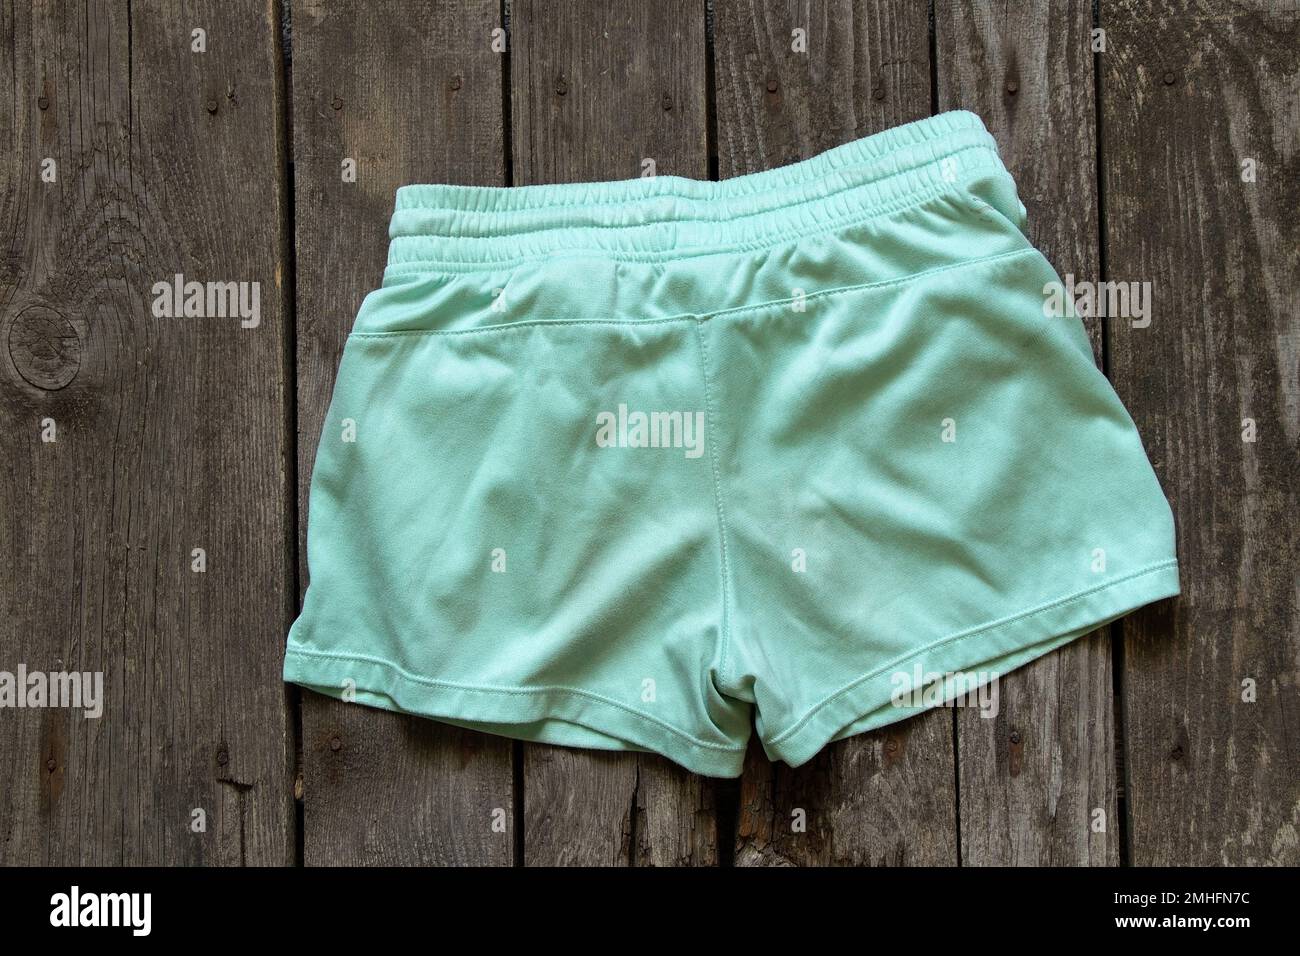 womens shorts lay on rustic brown background, womens clothing, fashion Stock Photo